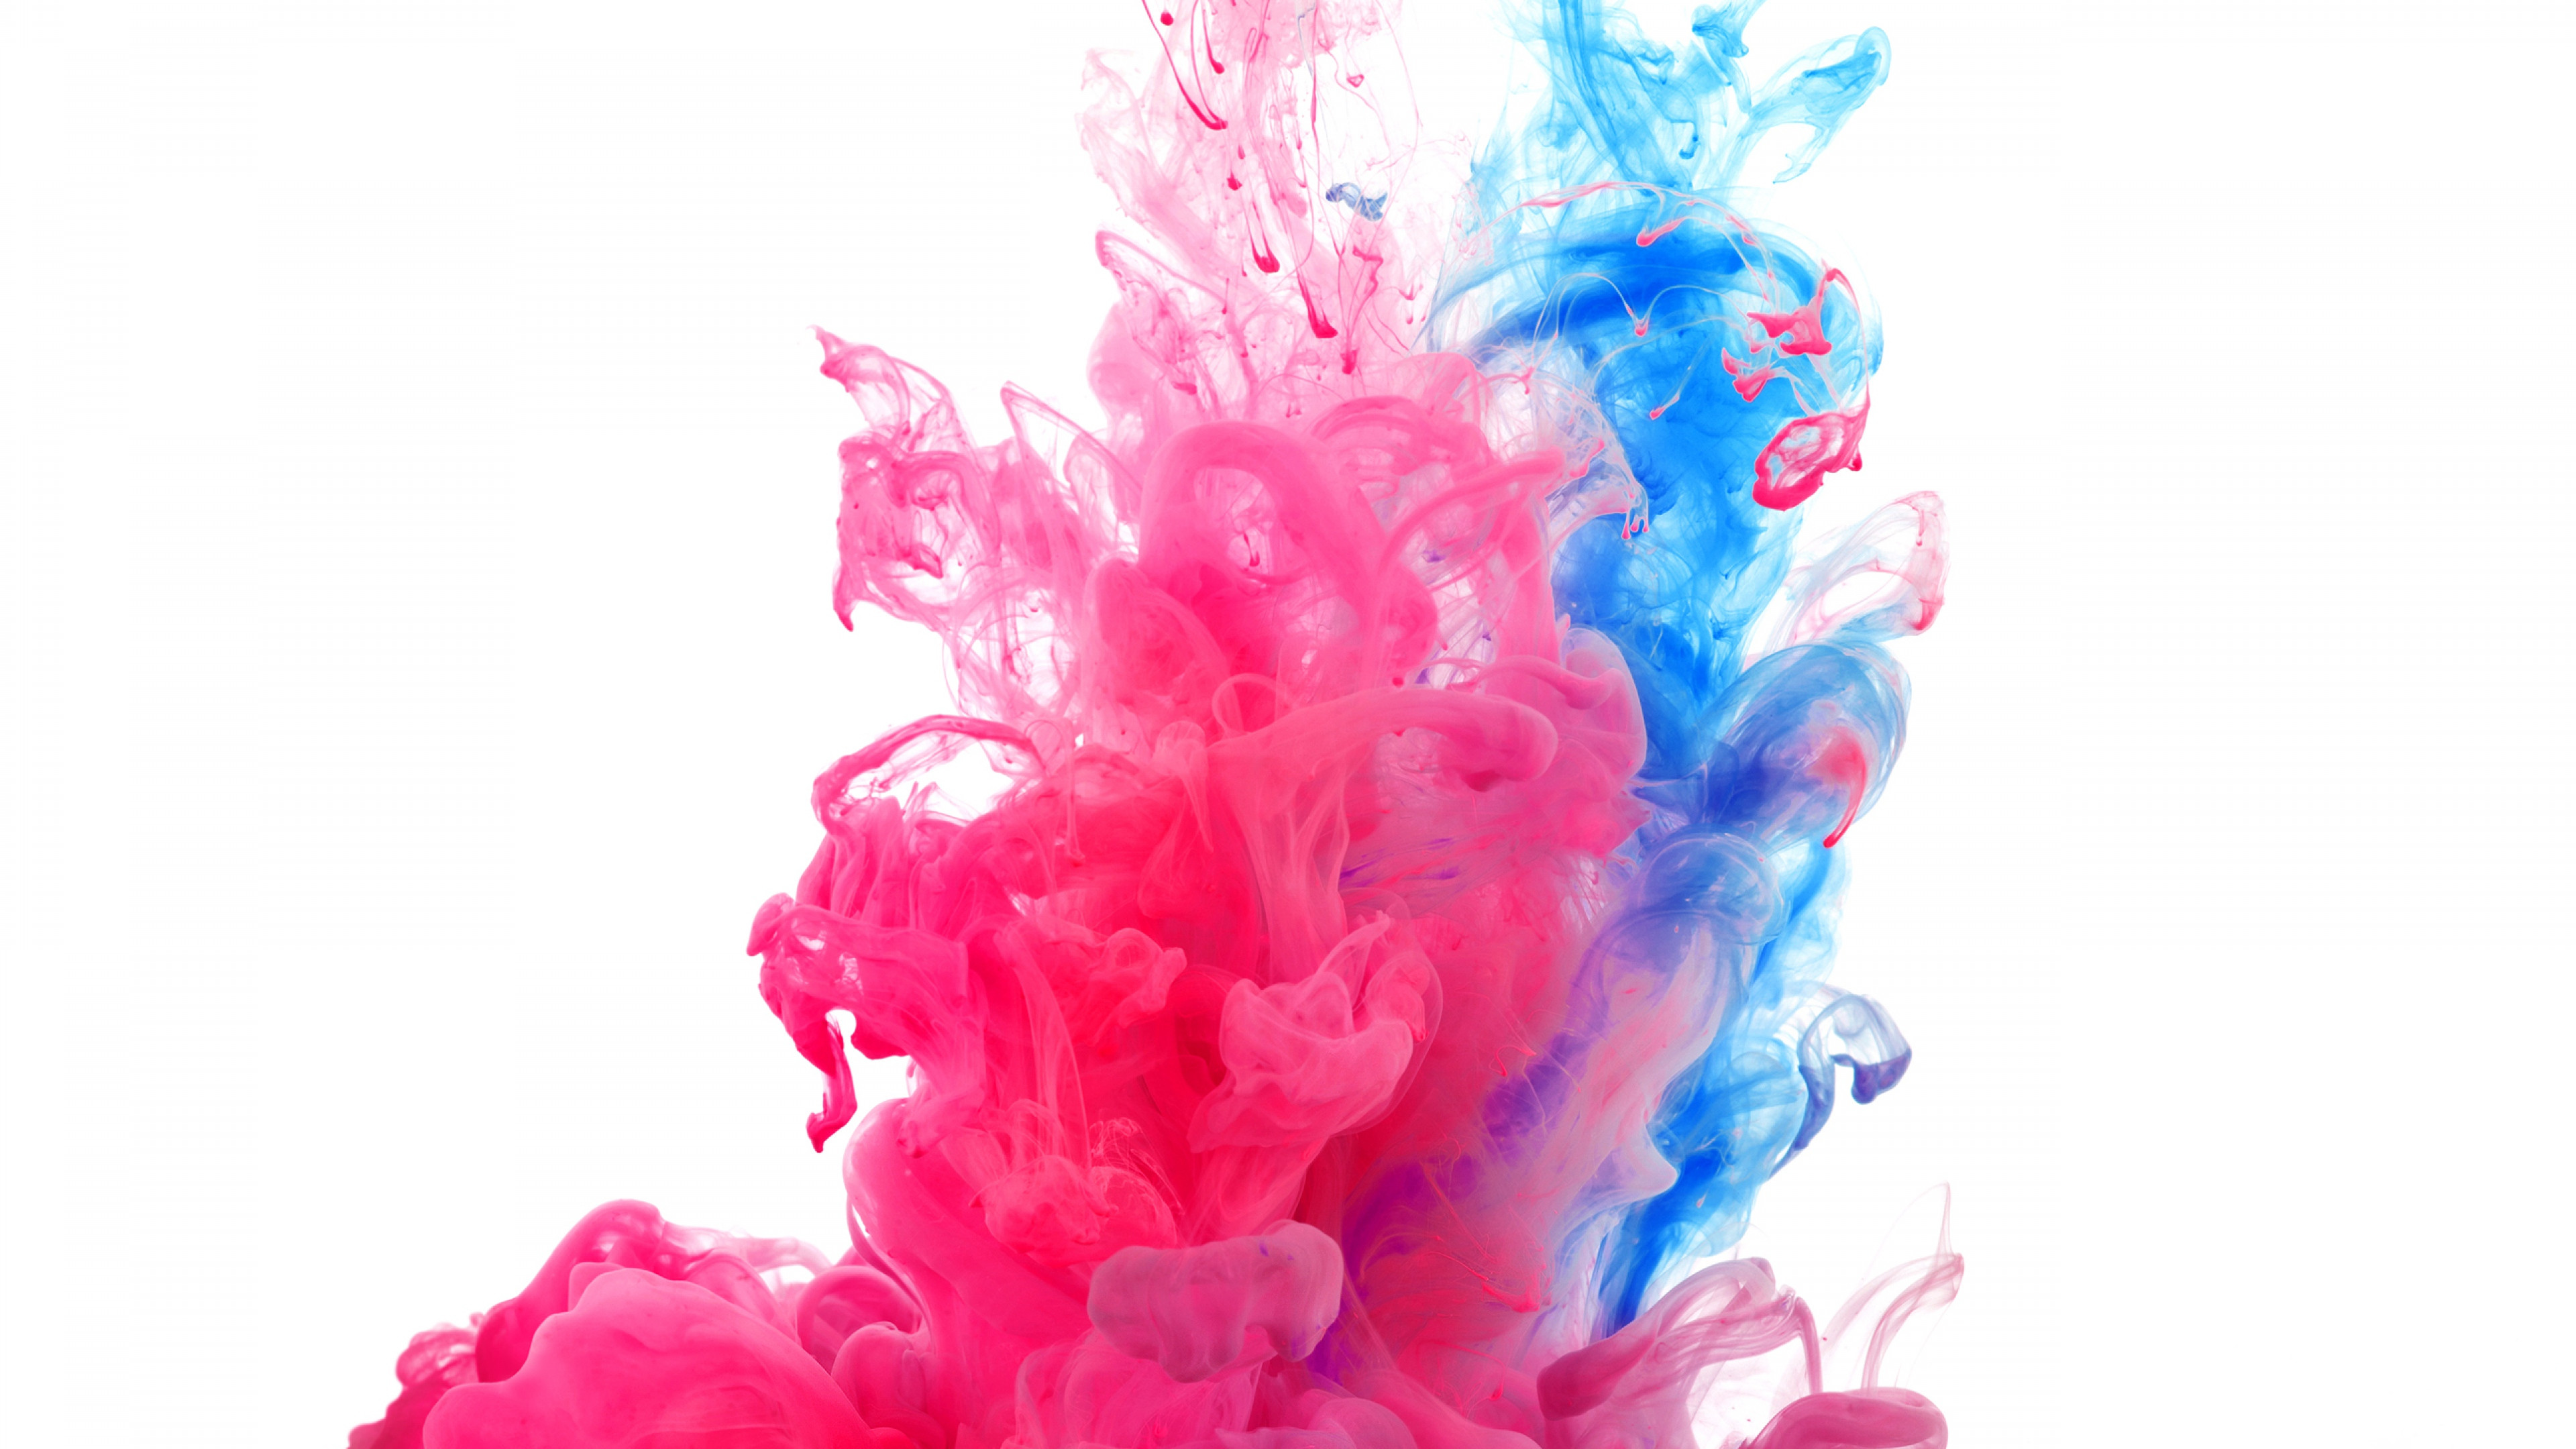 Wallpaper Holi, 4k, 5k wallpaper, water, India, public holiday, paint,  underwater, red, blue, live wallpaper, live photo, Abstract #545 - Page 2